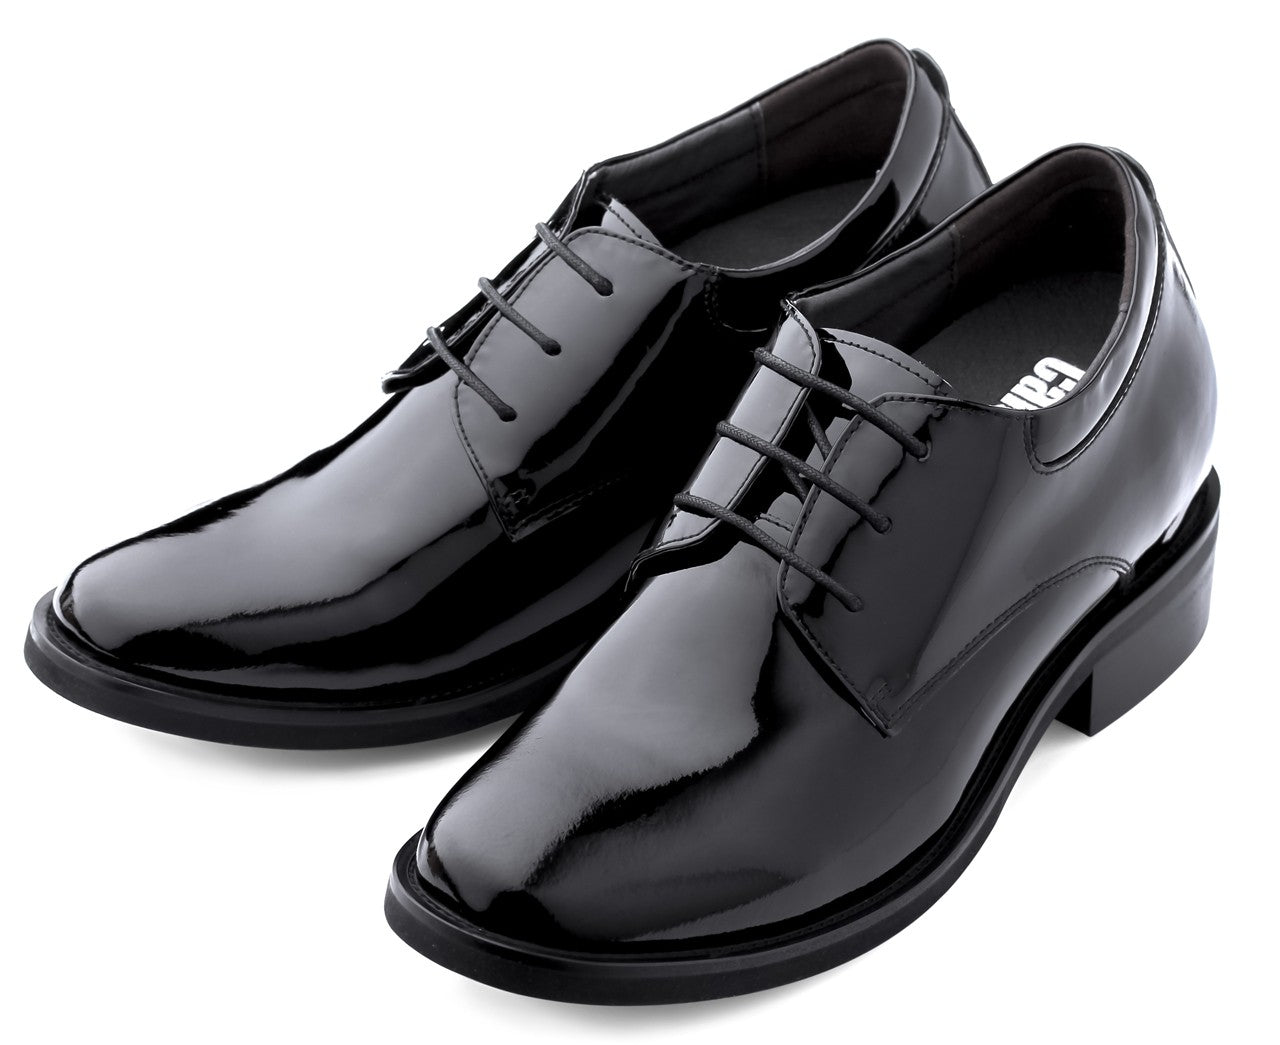 Elevator shoes height increase CALDEN Lightweight Patent Leather Elevator Shoes - Four Inches - K595101